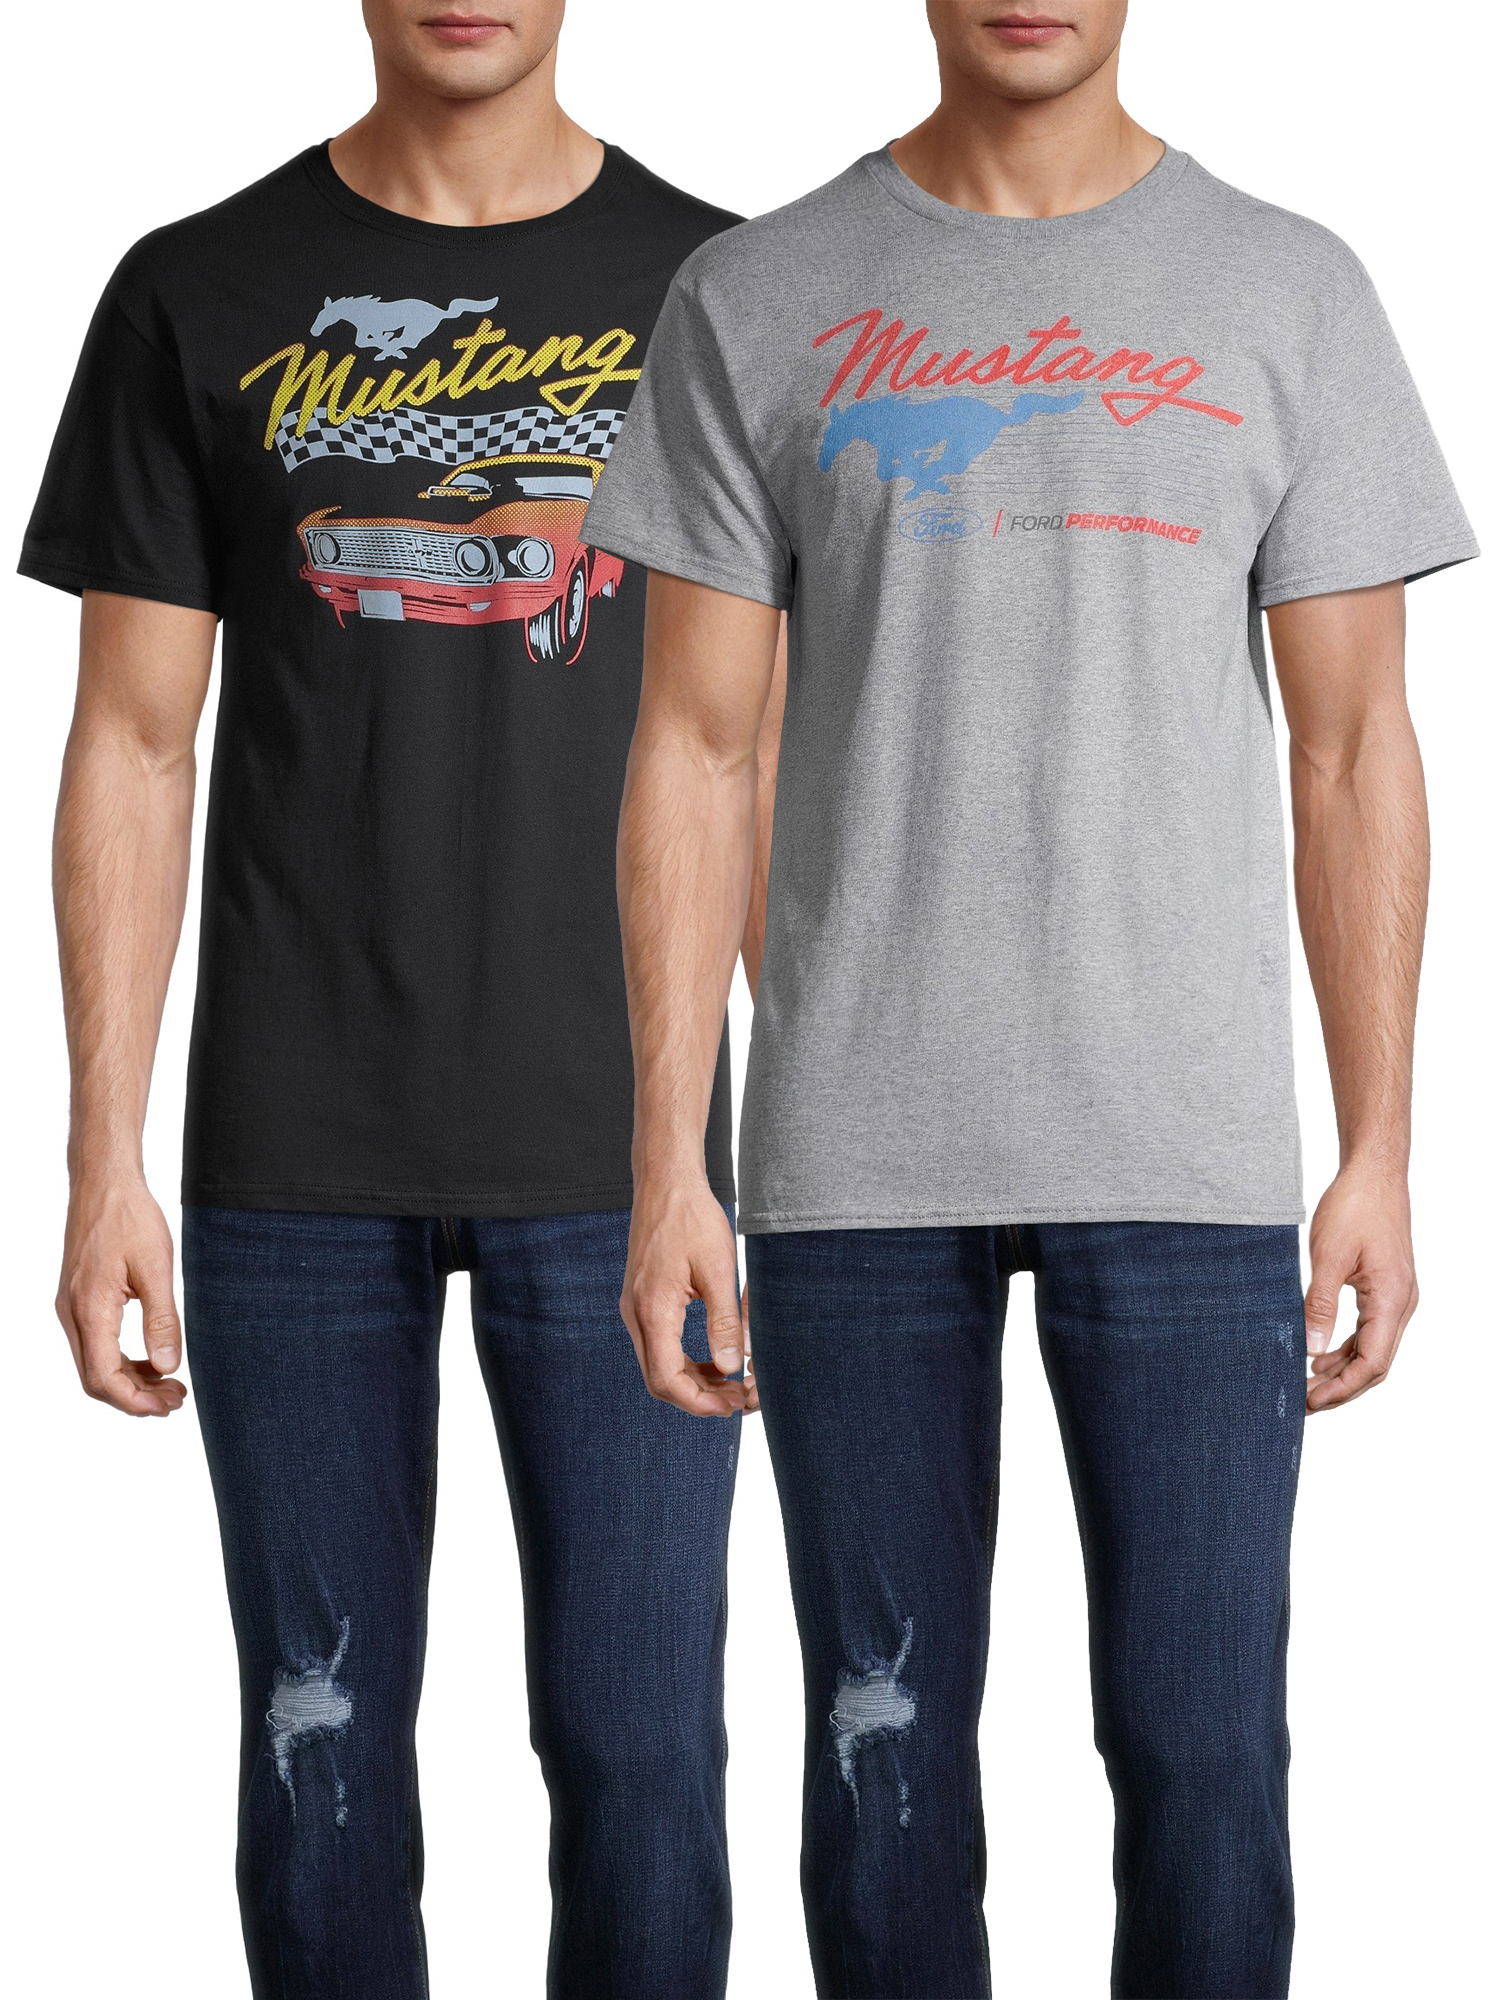 Ford Vintage Mustang & Mustang Racing Men's and Big Men's Graphic Casual T-Shirt, 2-Pack - image 1 of 11